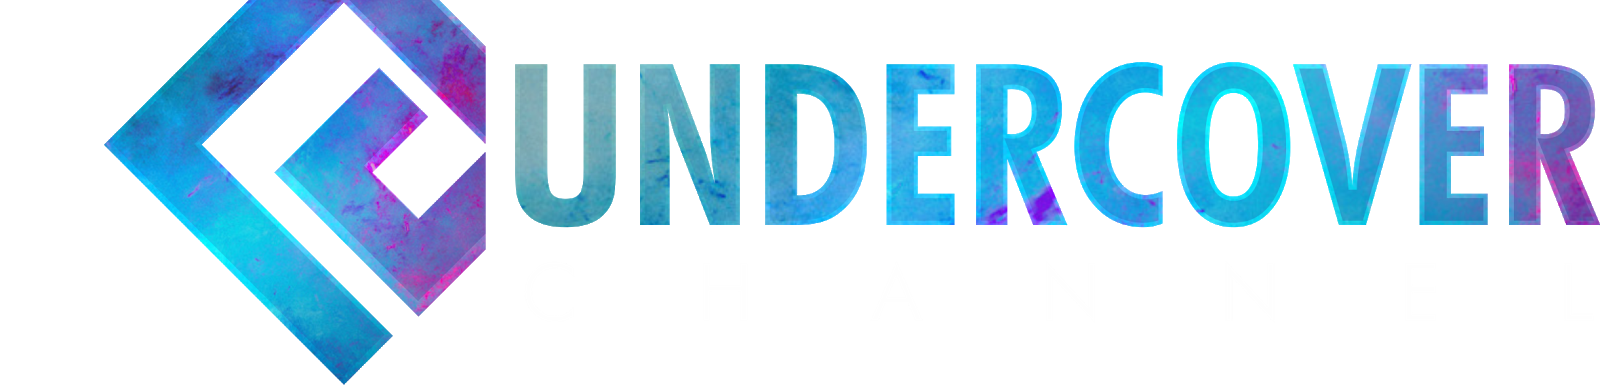 Undercover Channel